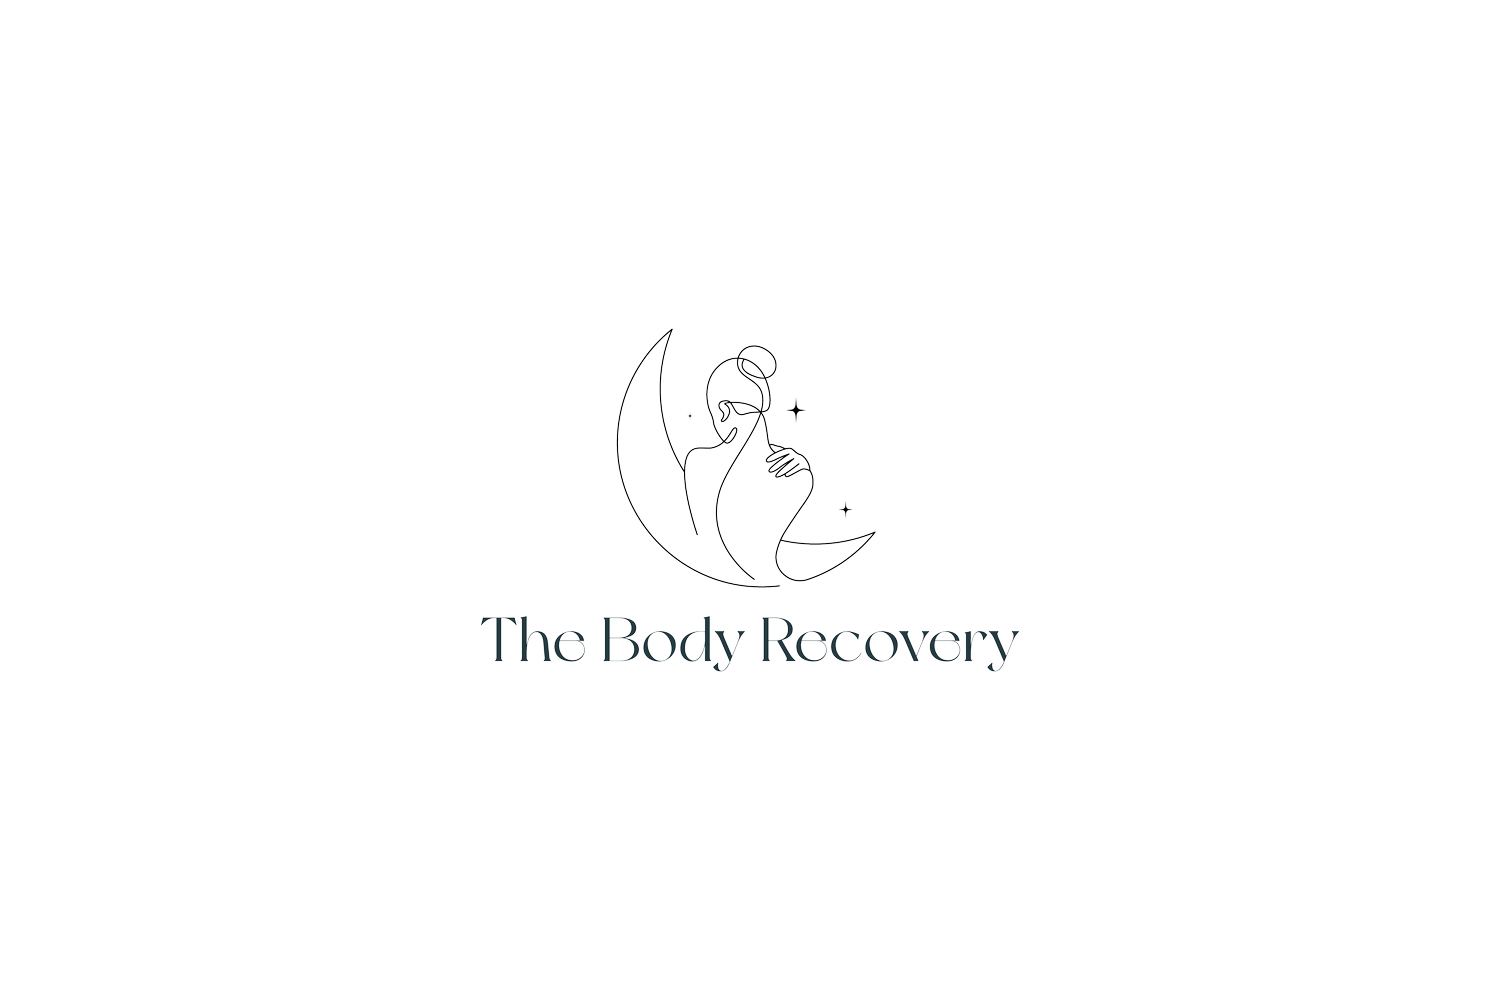 The Body Recovery